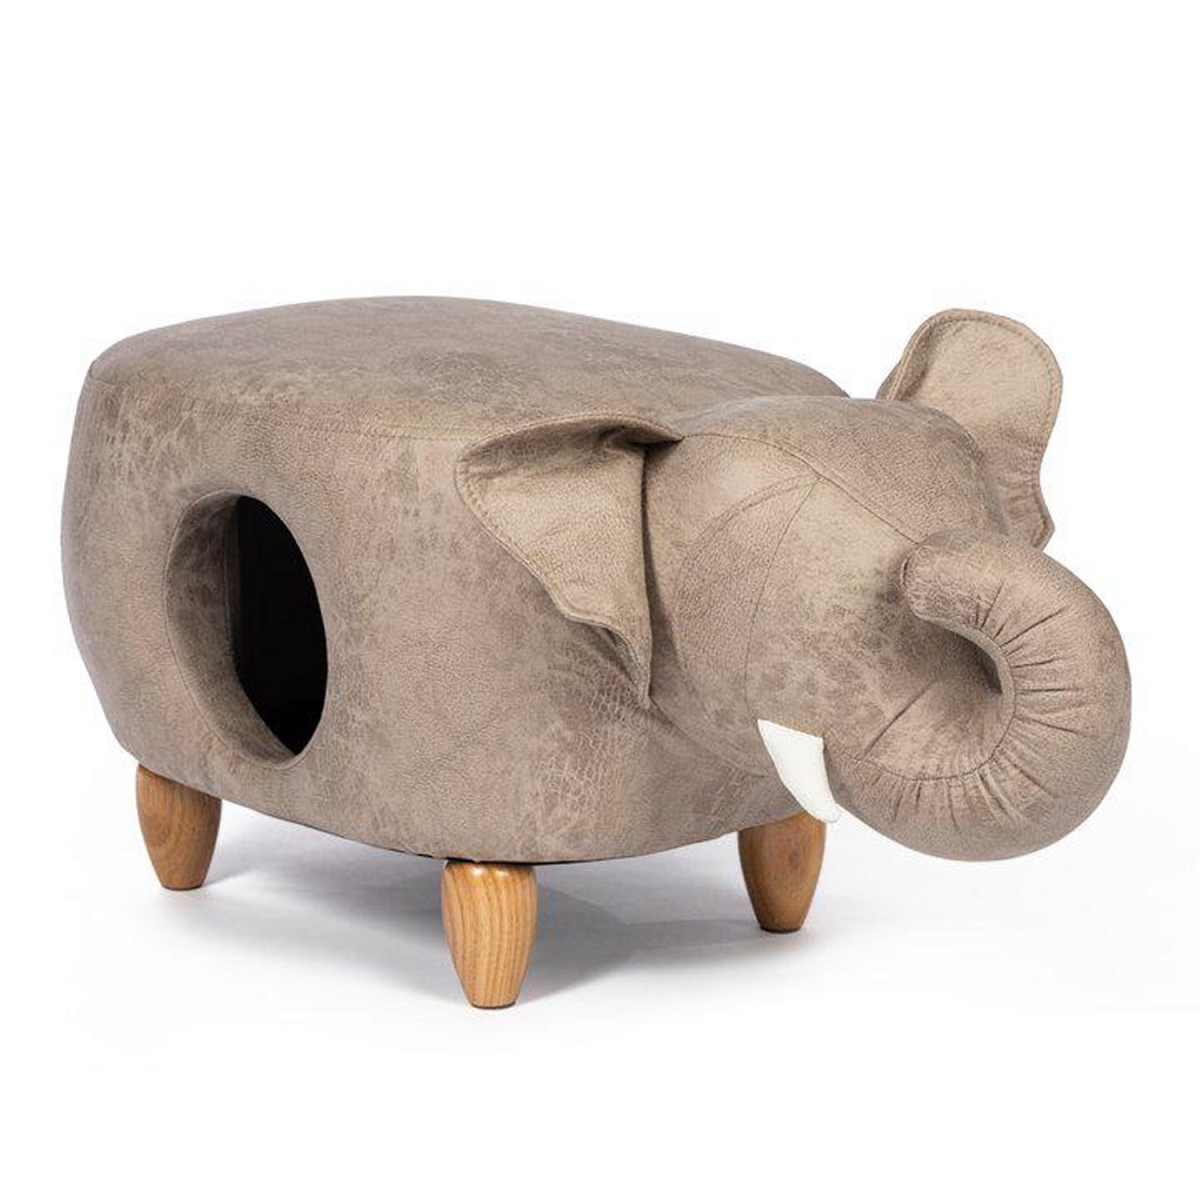 Picture of Prevue Pet Products PP-7390 Elephant Shape Ottoman, Gray